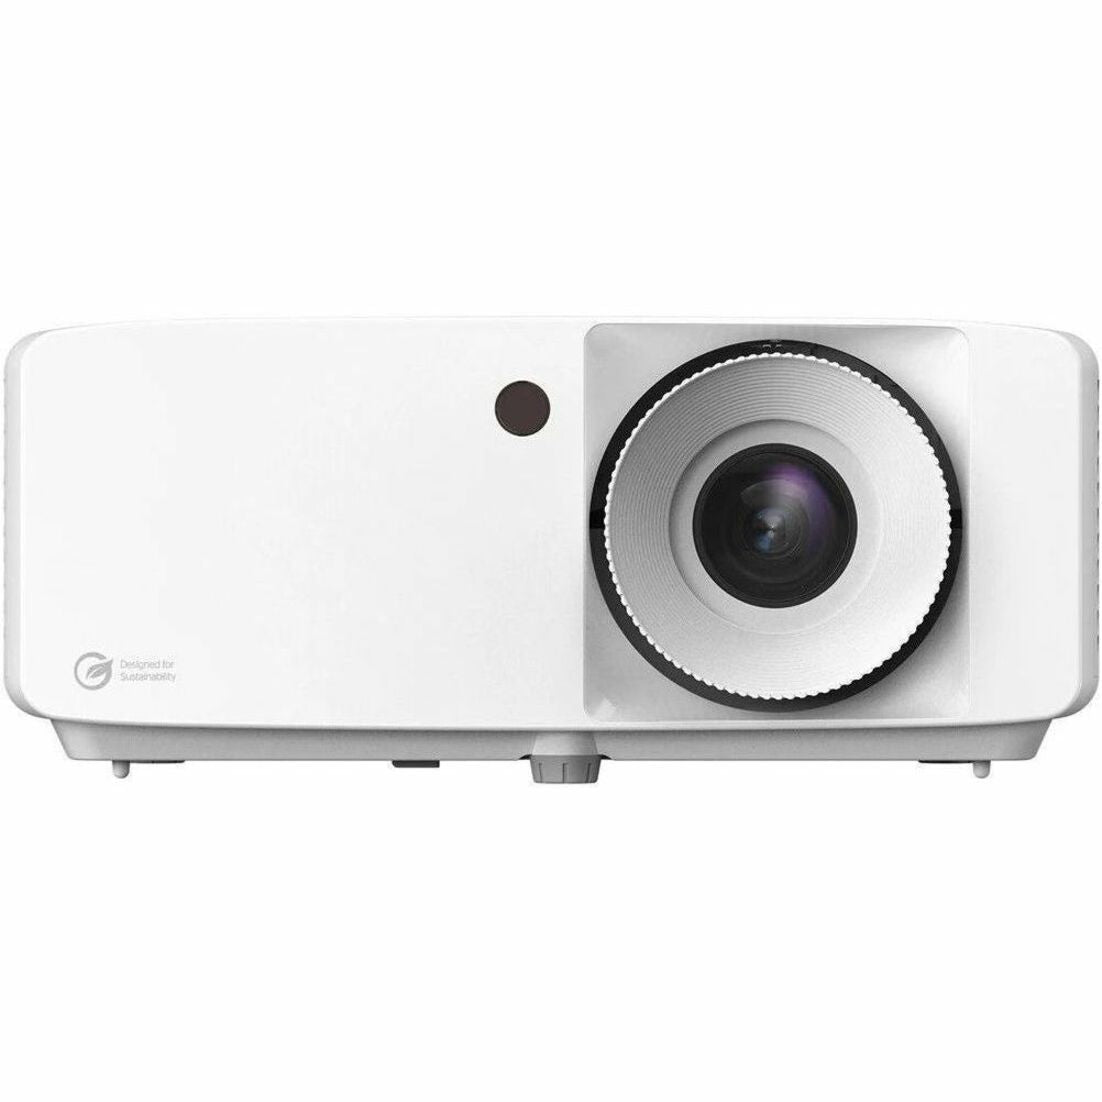 Optoma ZH462 Eco-friendly Compact High Brightness Full HD Laser Projector, 16:9, Portable, White